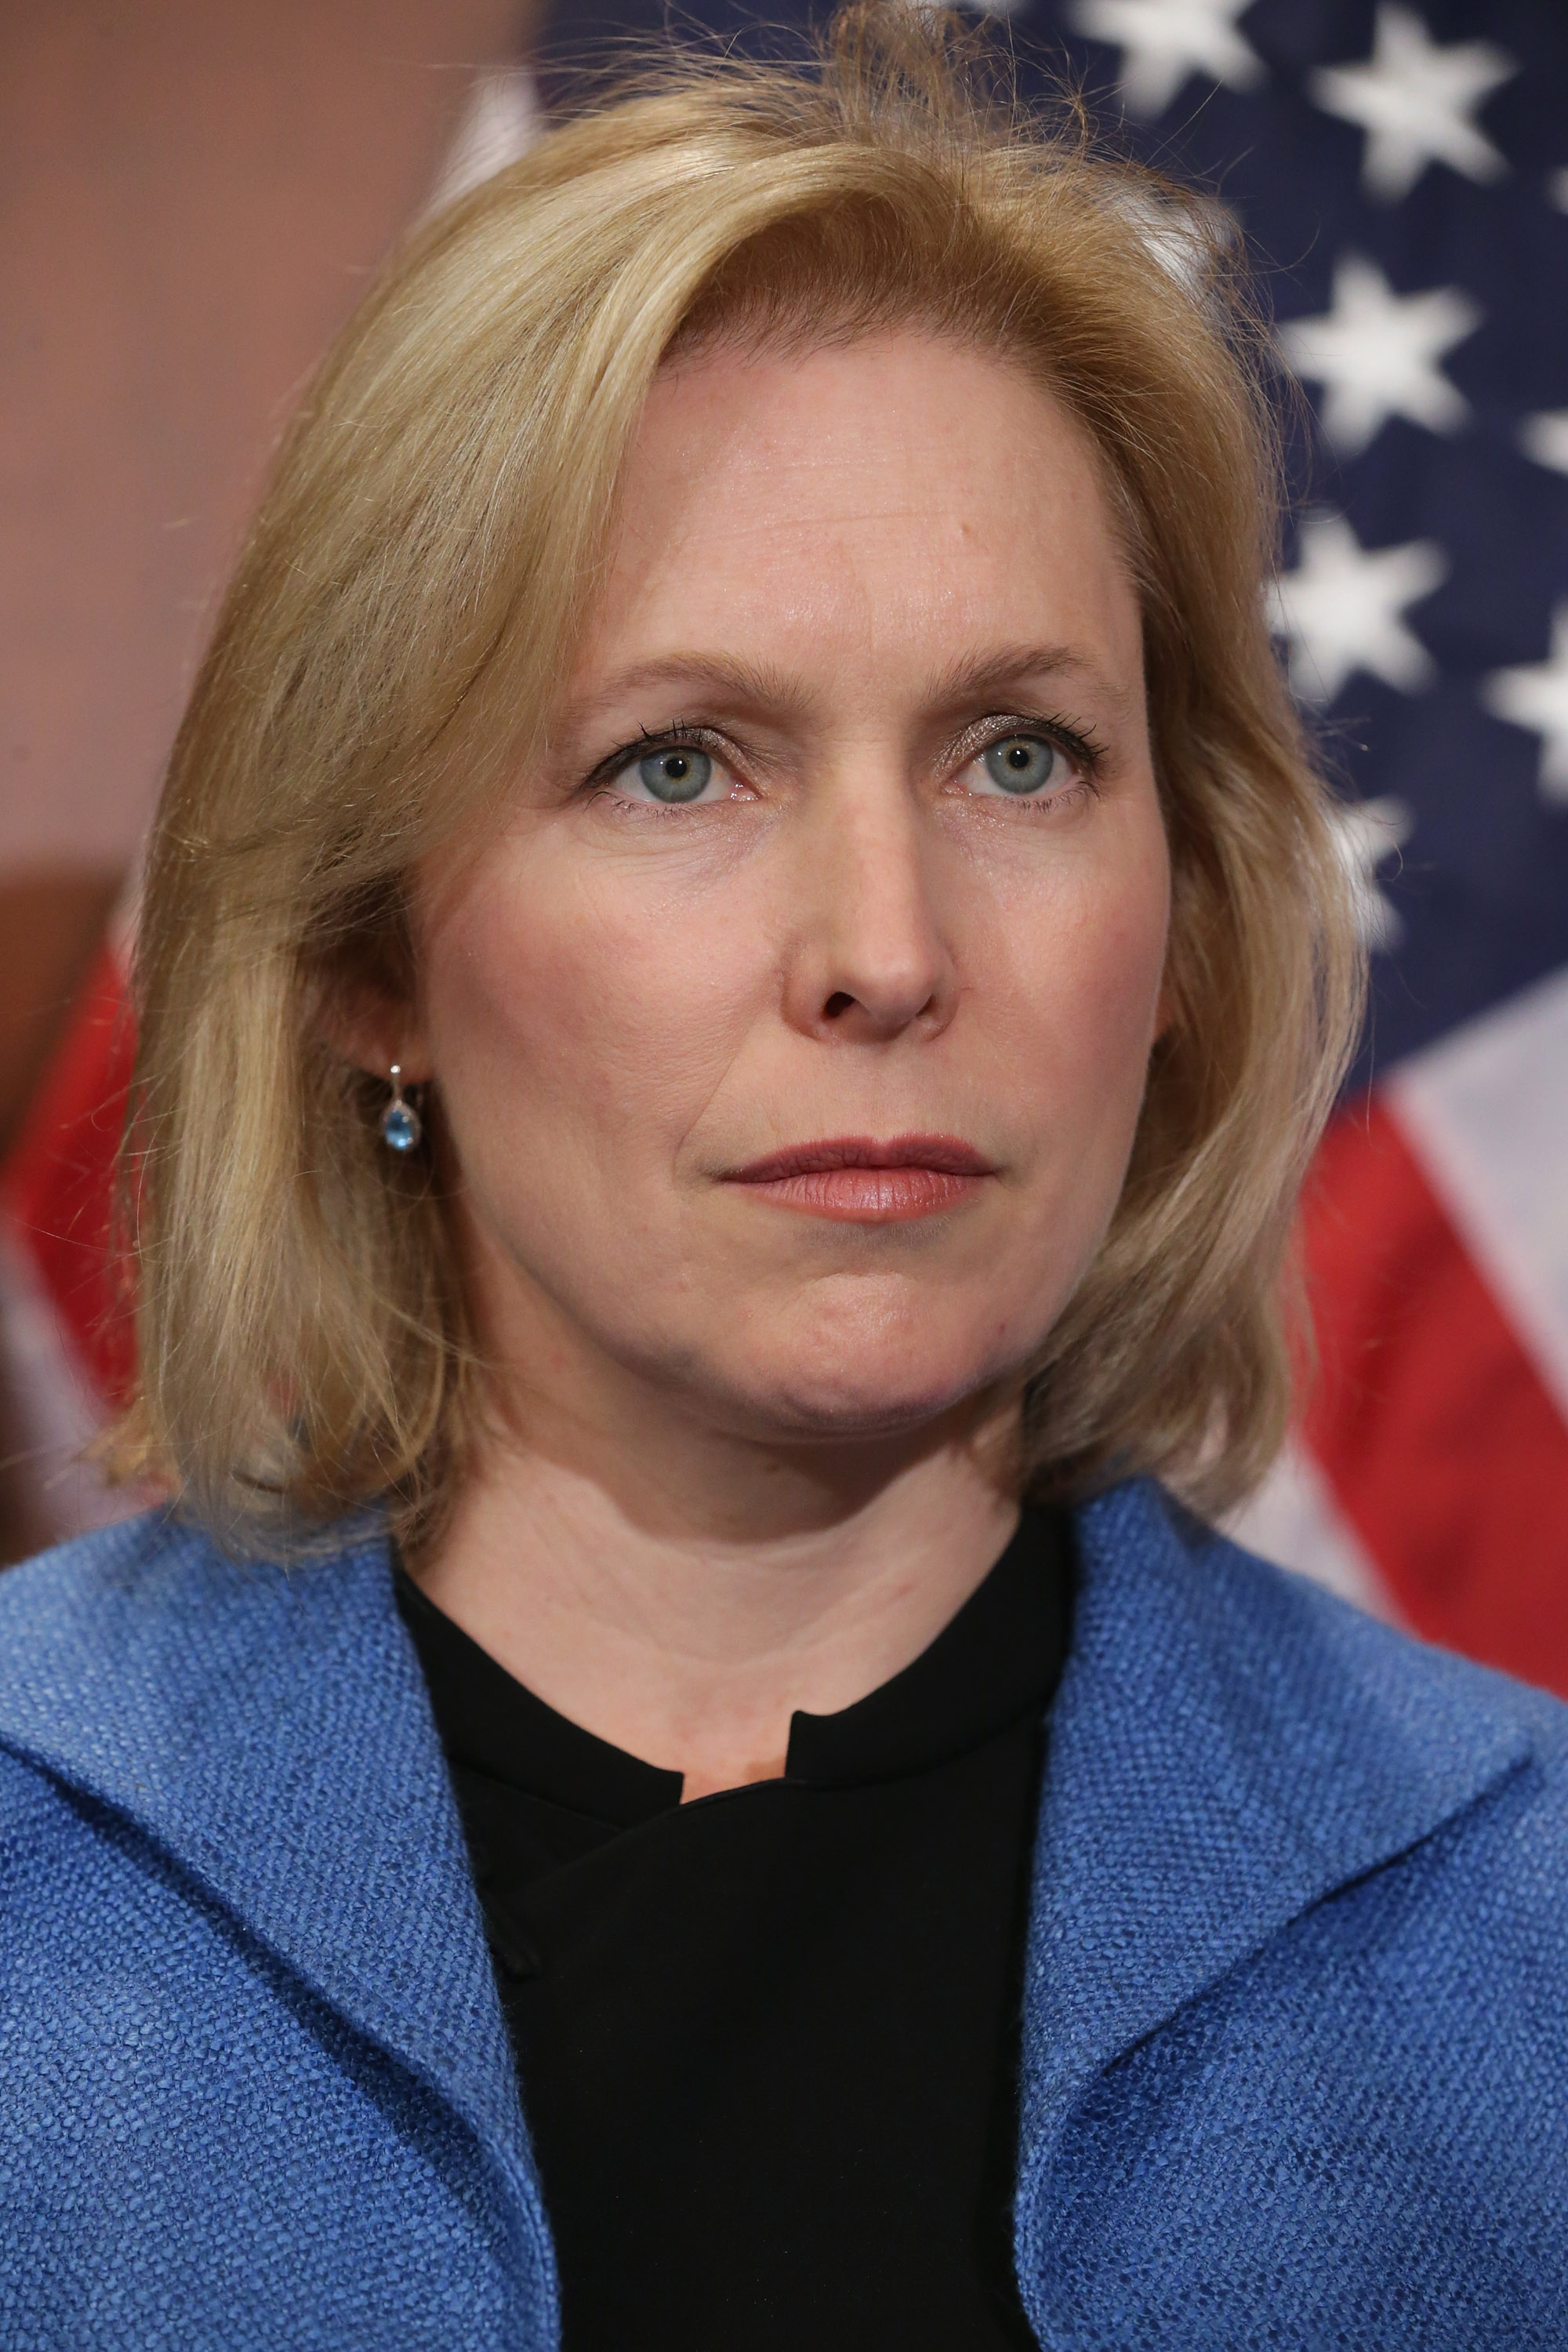 Sen. Kristen Gillibrand (D-NY) participates in a news conference about new legislation aimed at curbing sexual assults on college and university campuses at the U.S. Capitol. (Chip Somodevilla—Getty Images)